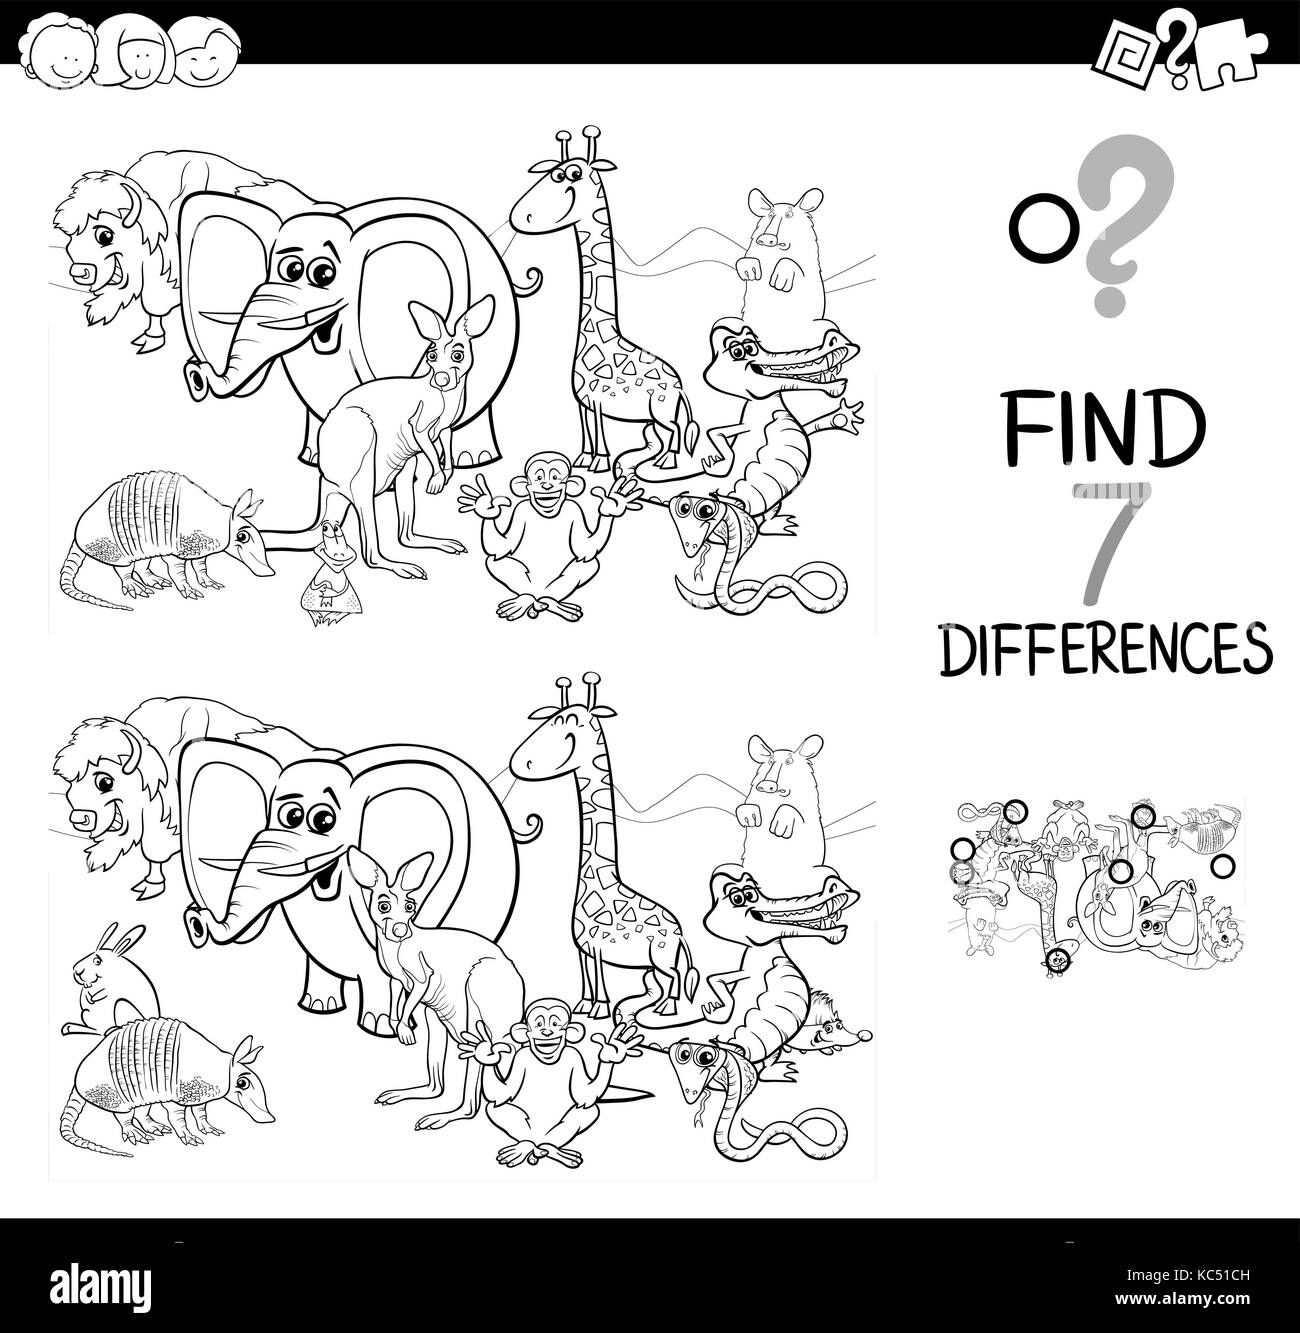 Black and White Cartoon Illustration of Searching Differences Between Pictures Educational Activity Game for Children with Wild Animal Characters Grou Stock Vector